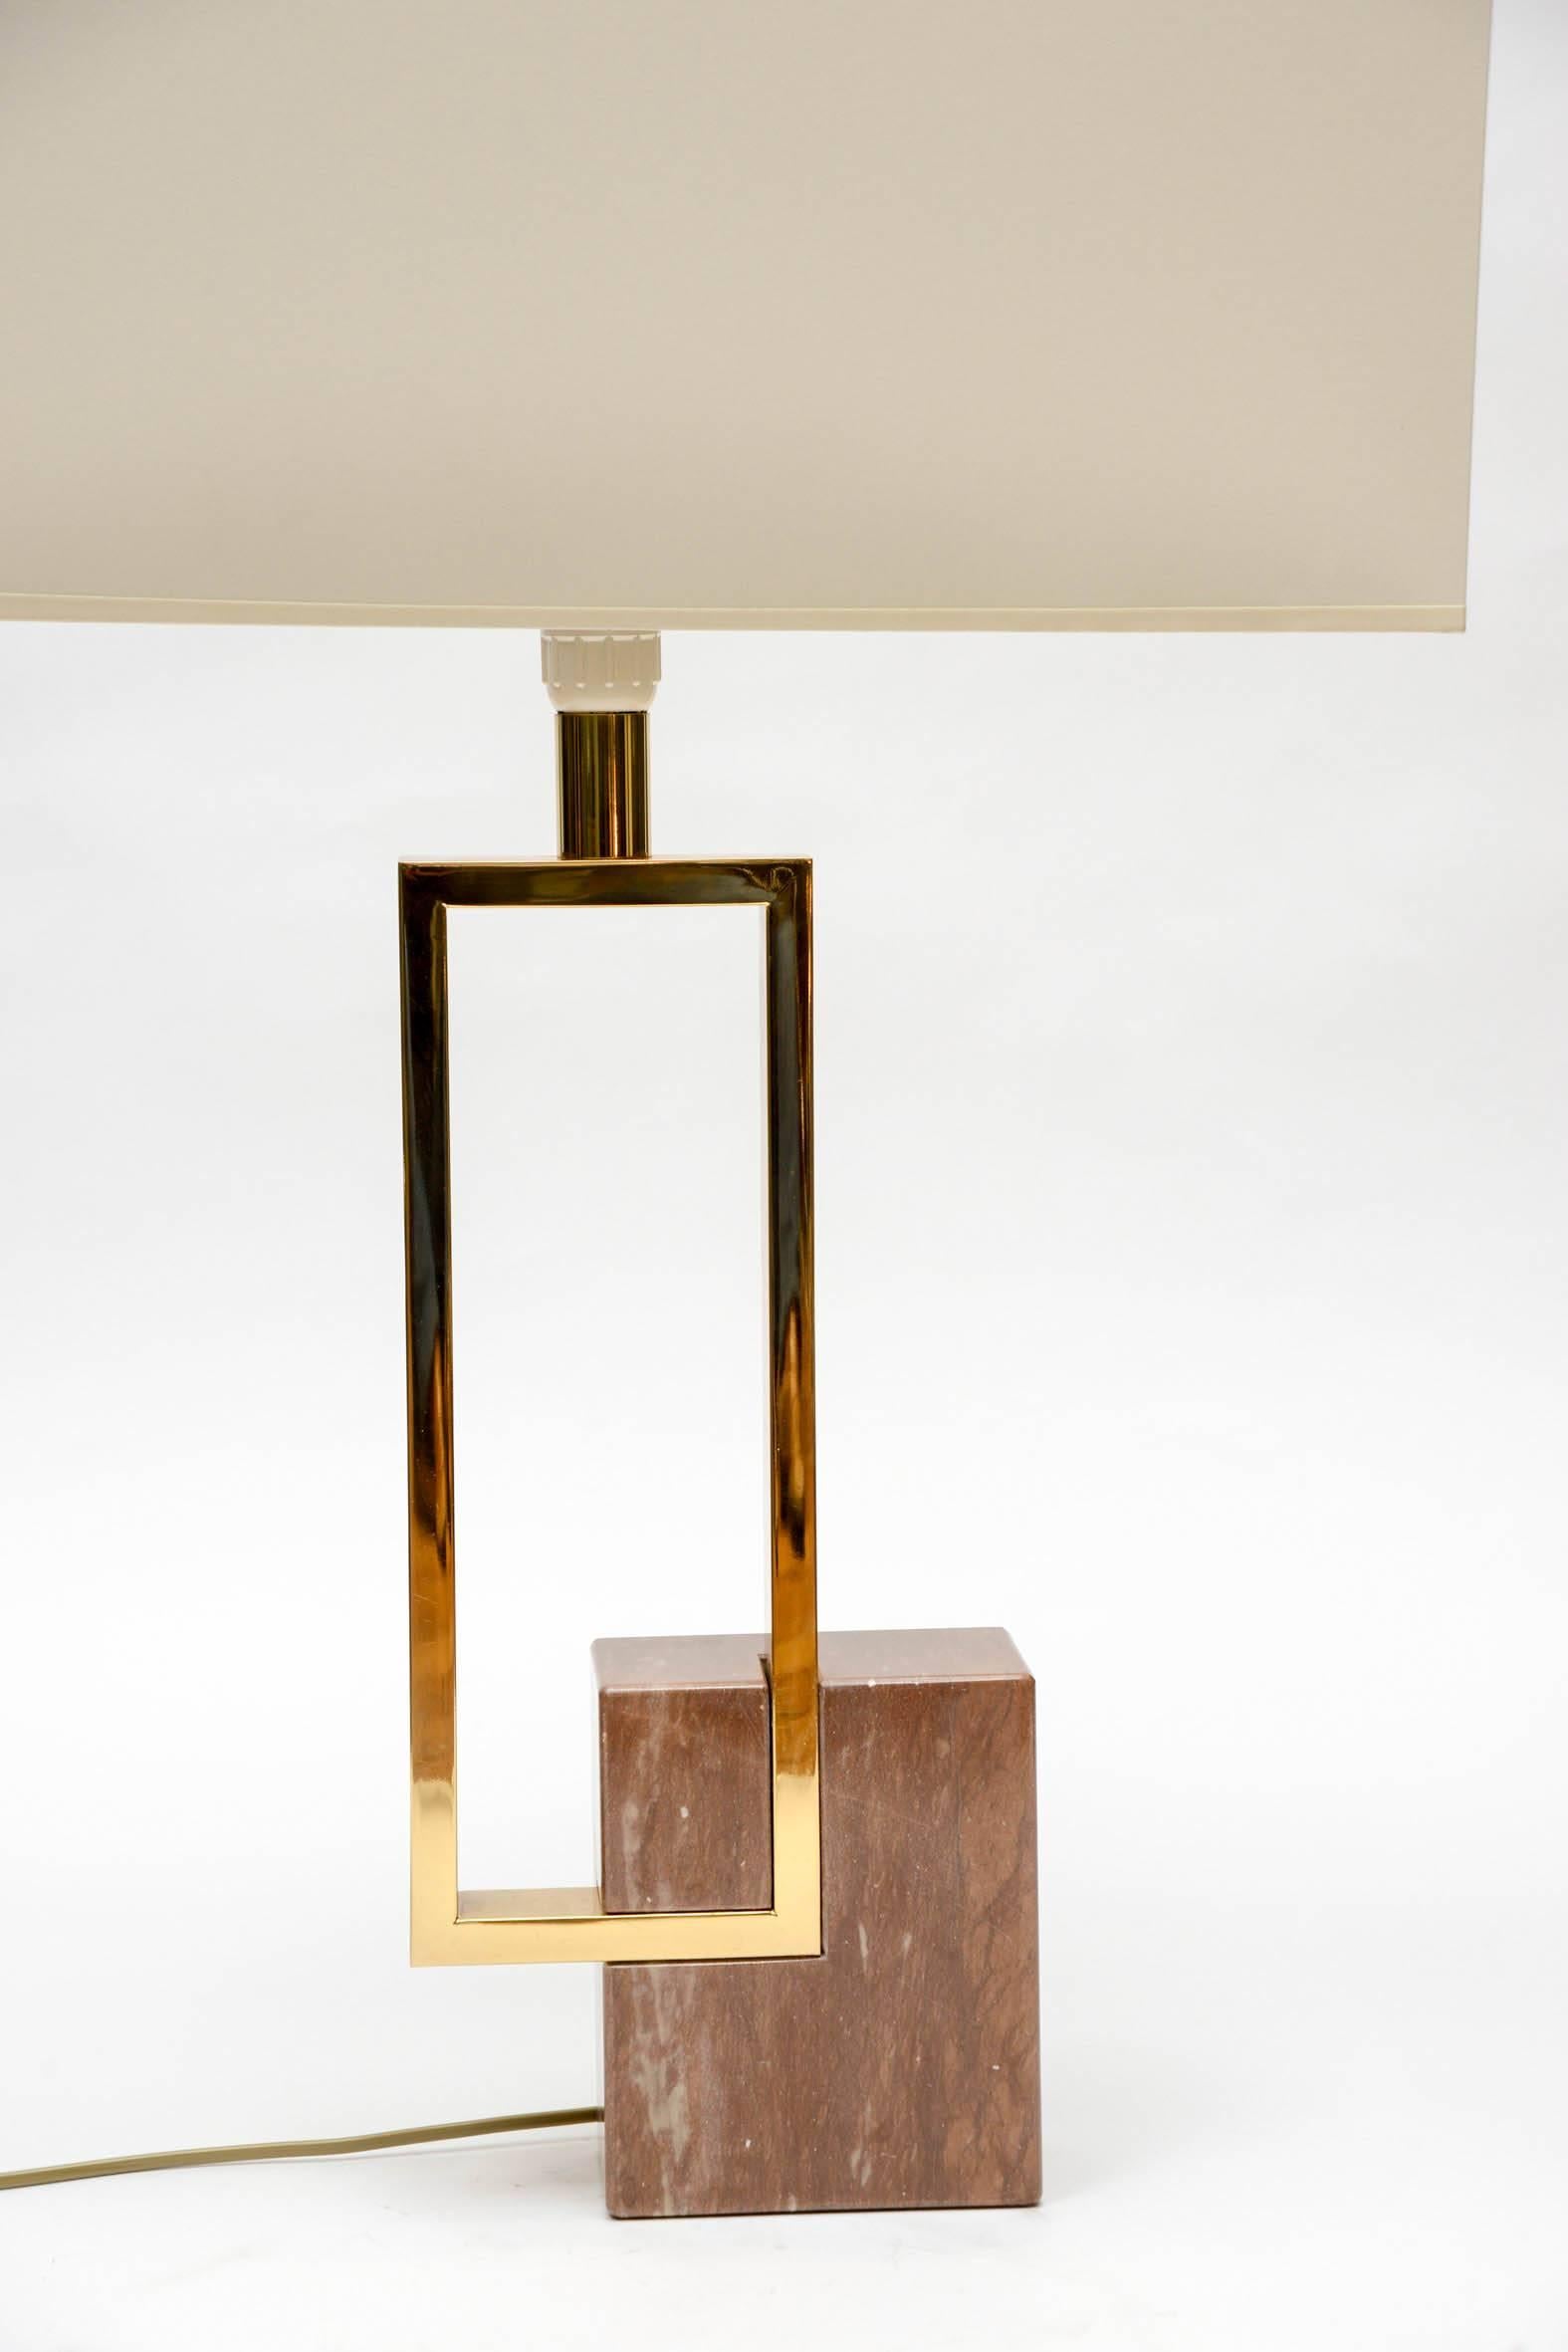 Elegant pair of lamps made of red marble feet setting a brass rectangle giving the illusion of an unbalanced structure.